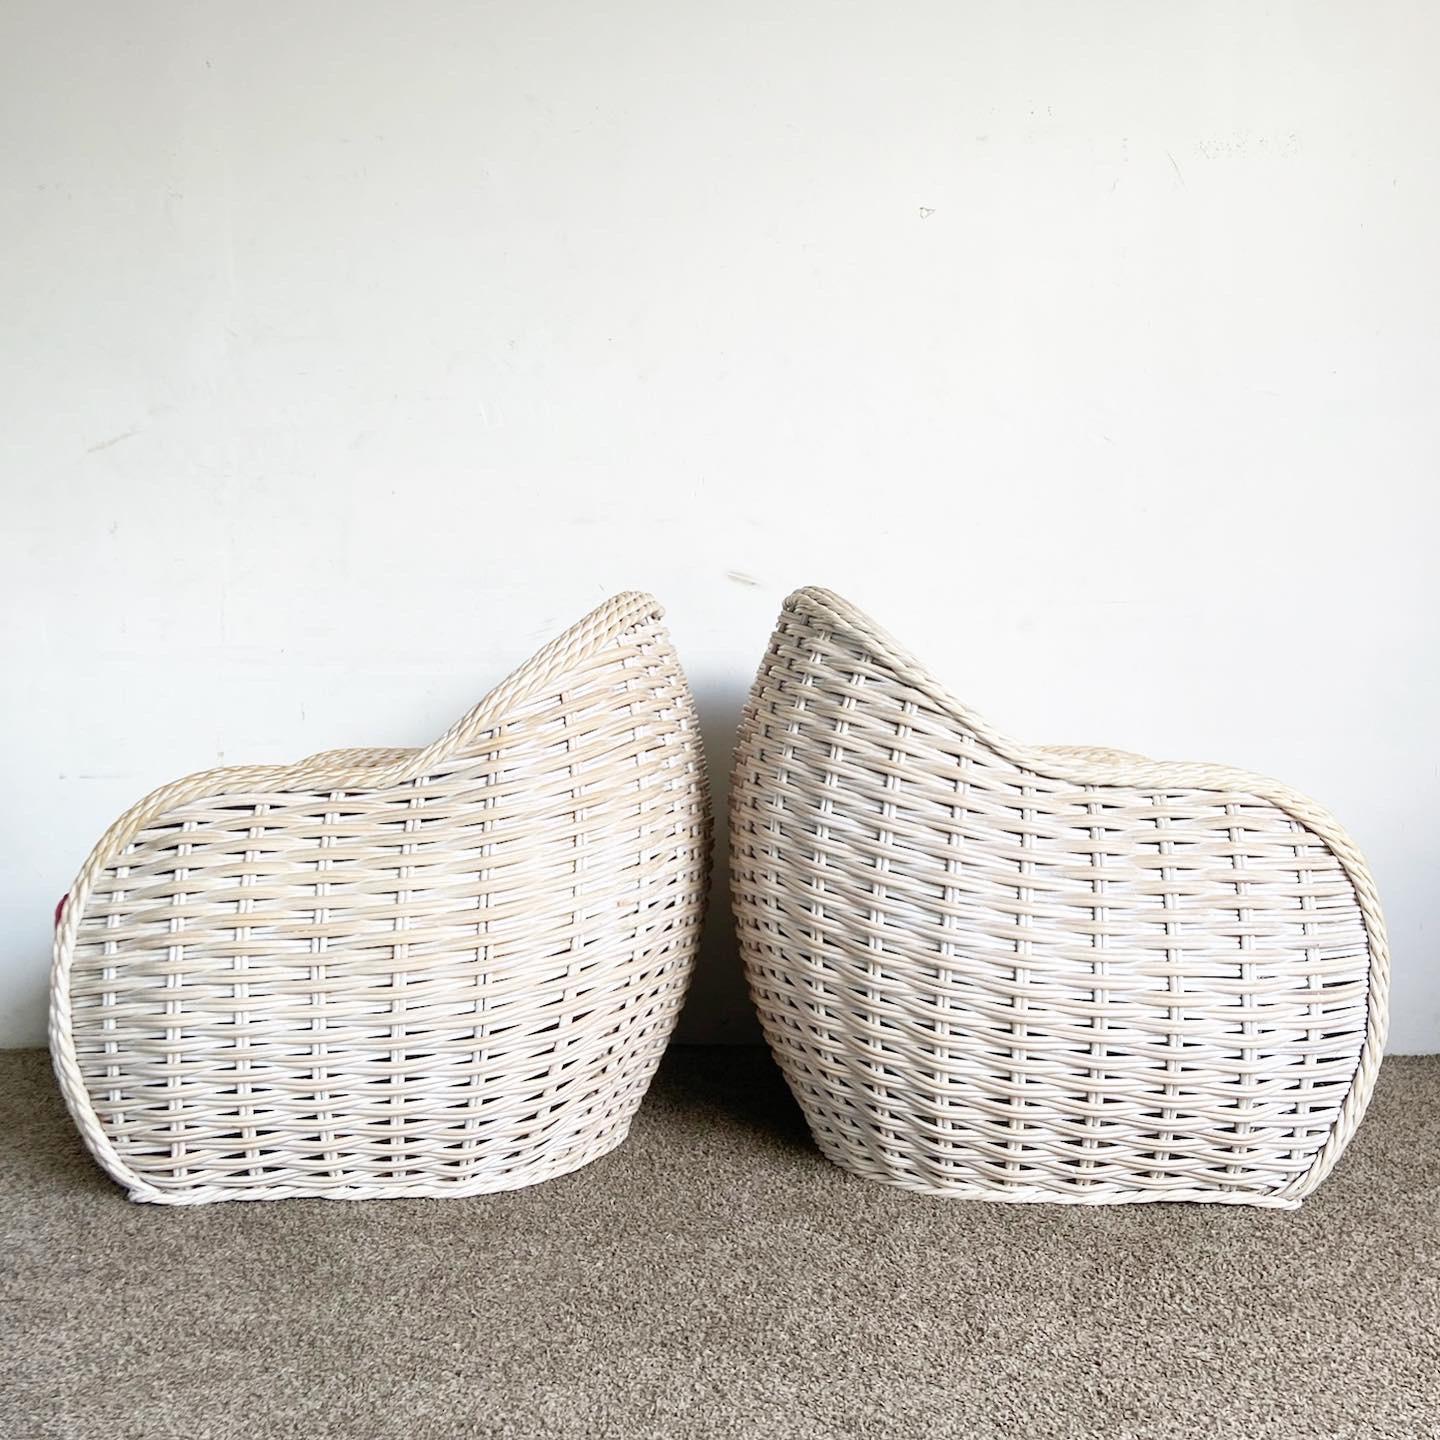 Stylish Boho Chic Woven Wicker Lounge Chairs with bulbous design and vibrant upholstery. A pair perfect for eclectic spaces.

Boho Chic Woven Wicker Lounge Chairs - a pair.
Distinctive bulbous design in white wash finish.
Vibrant red and white